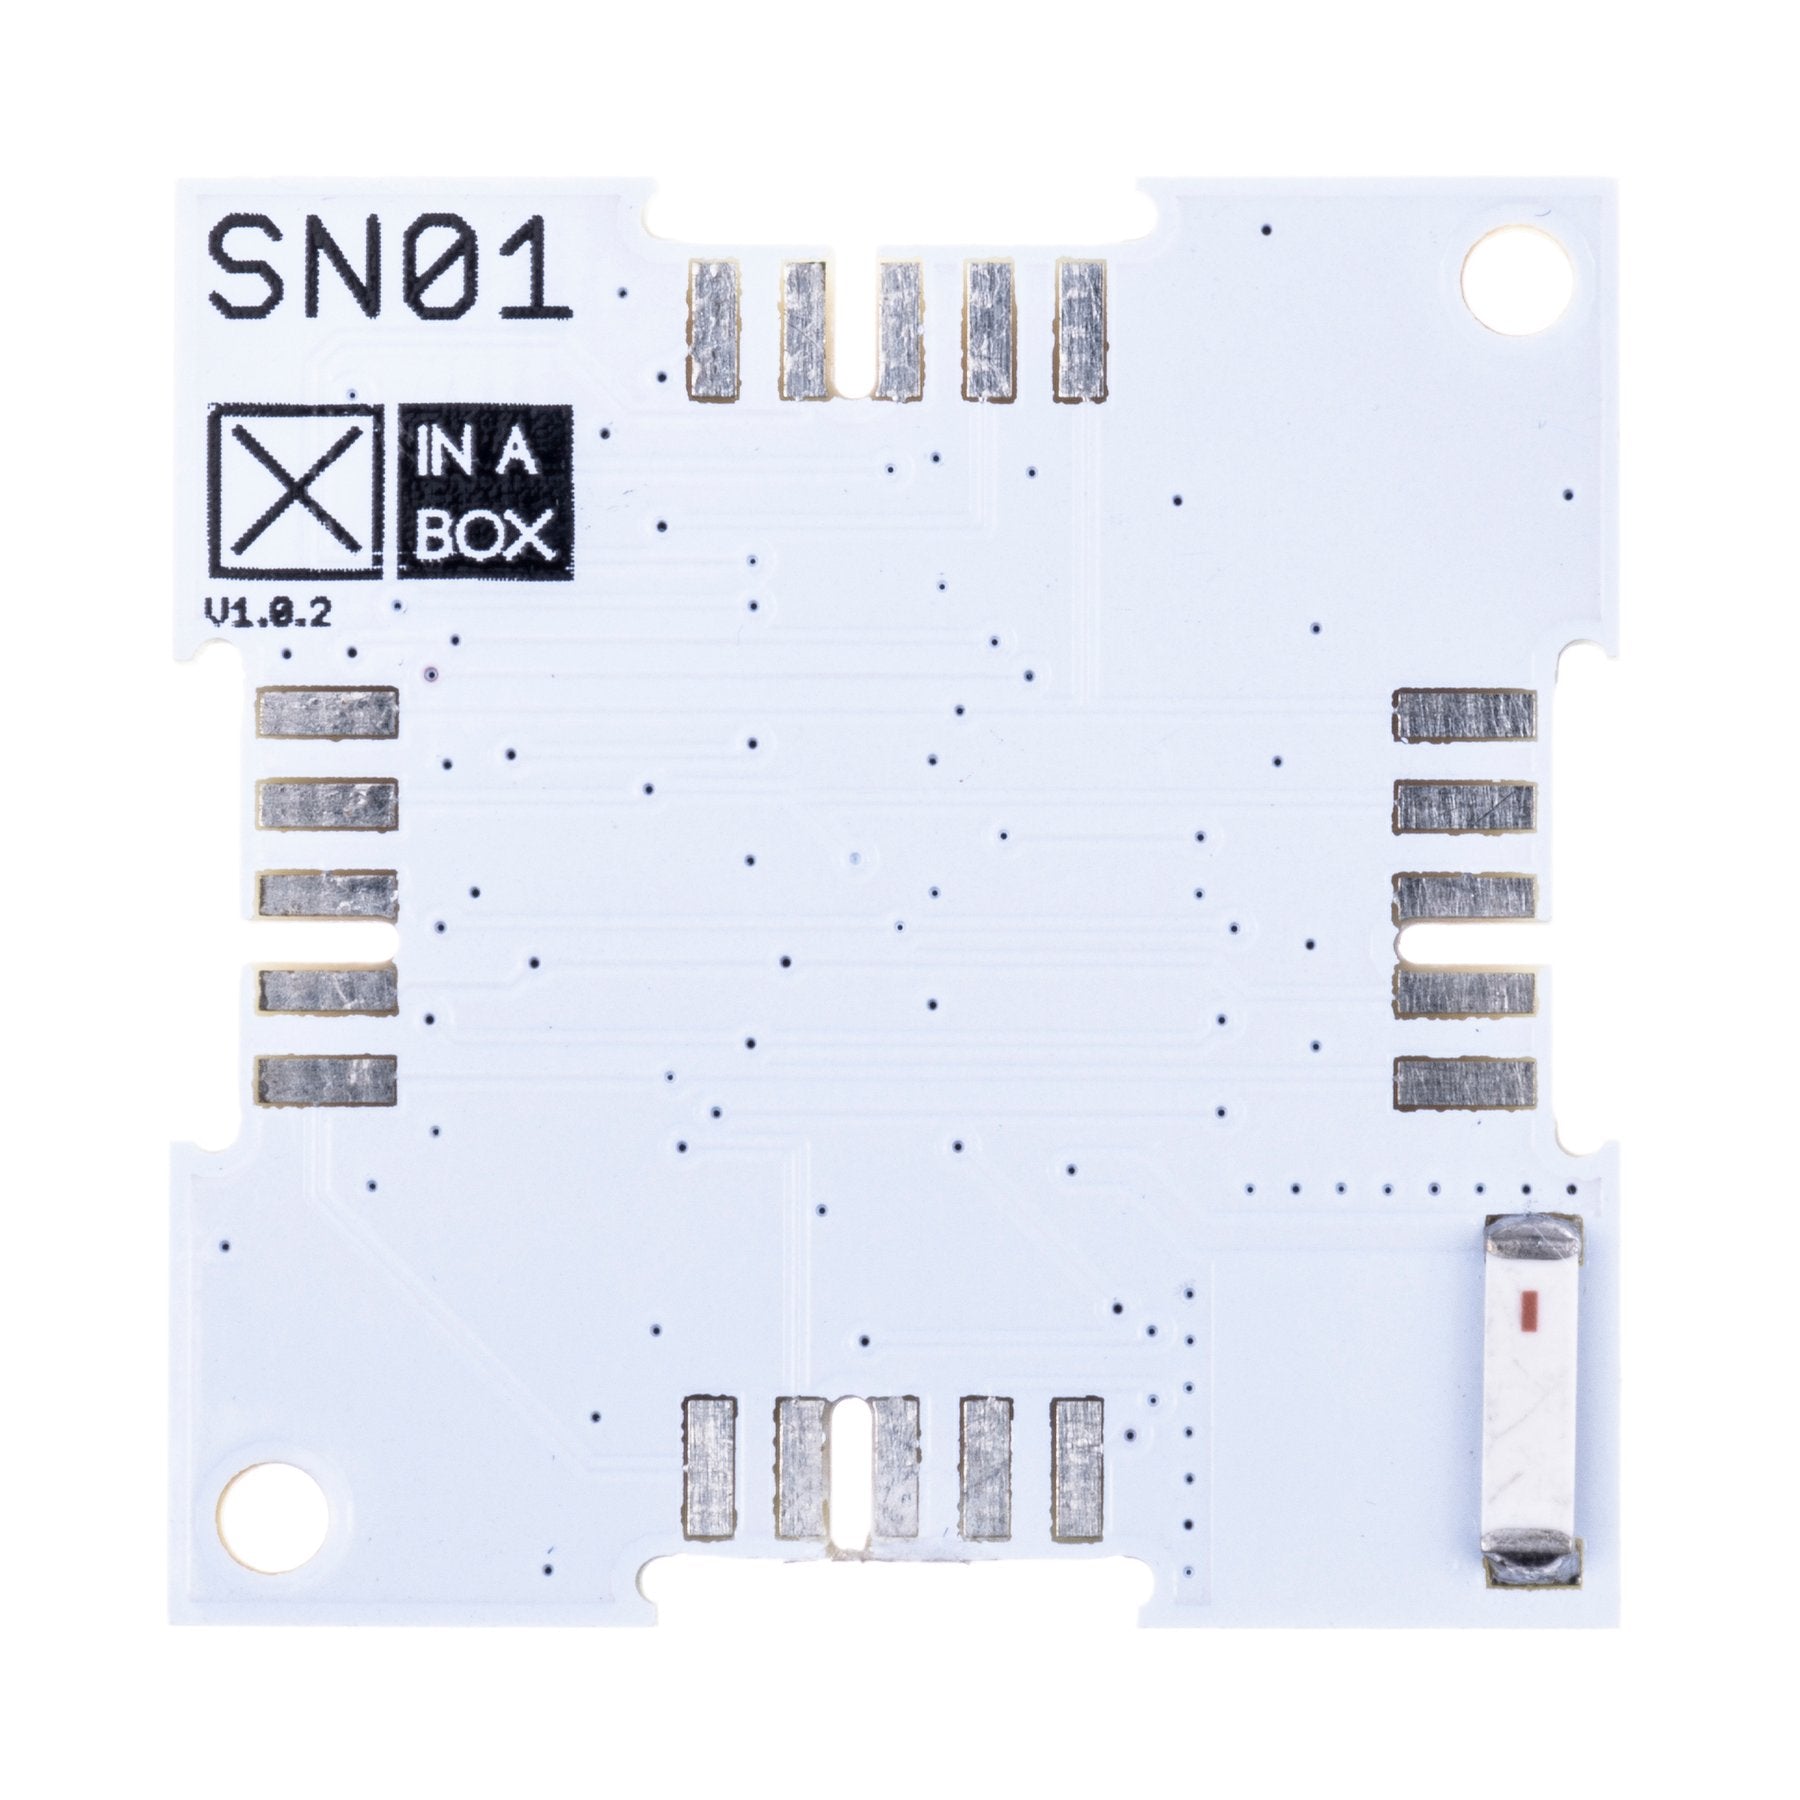 gnss gps receiver